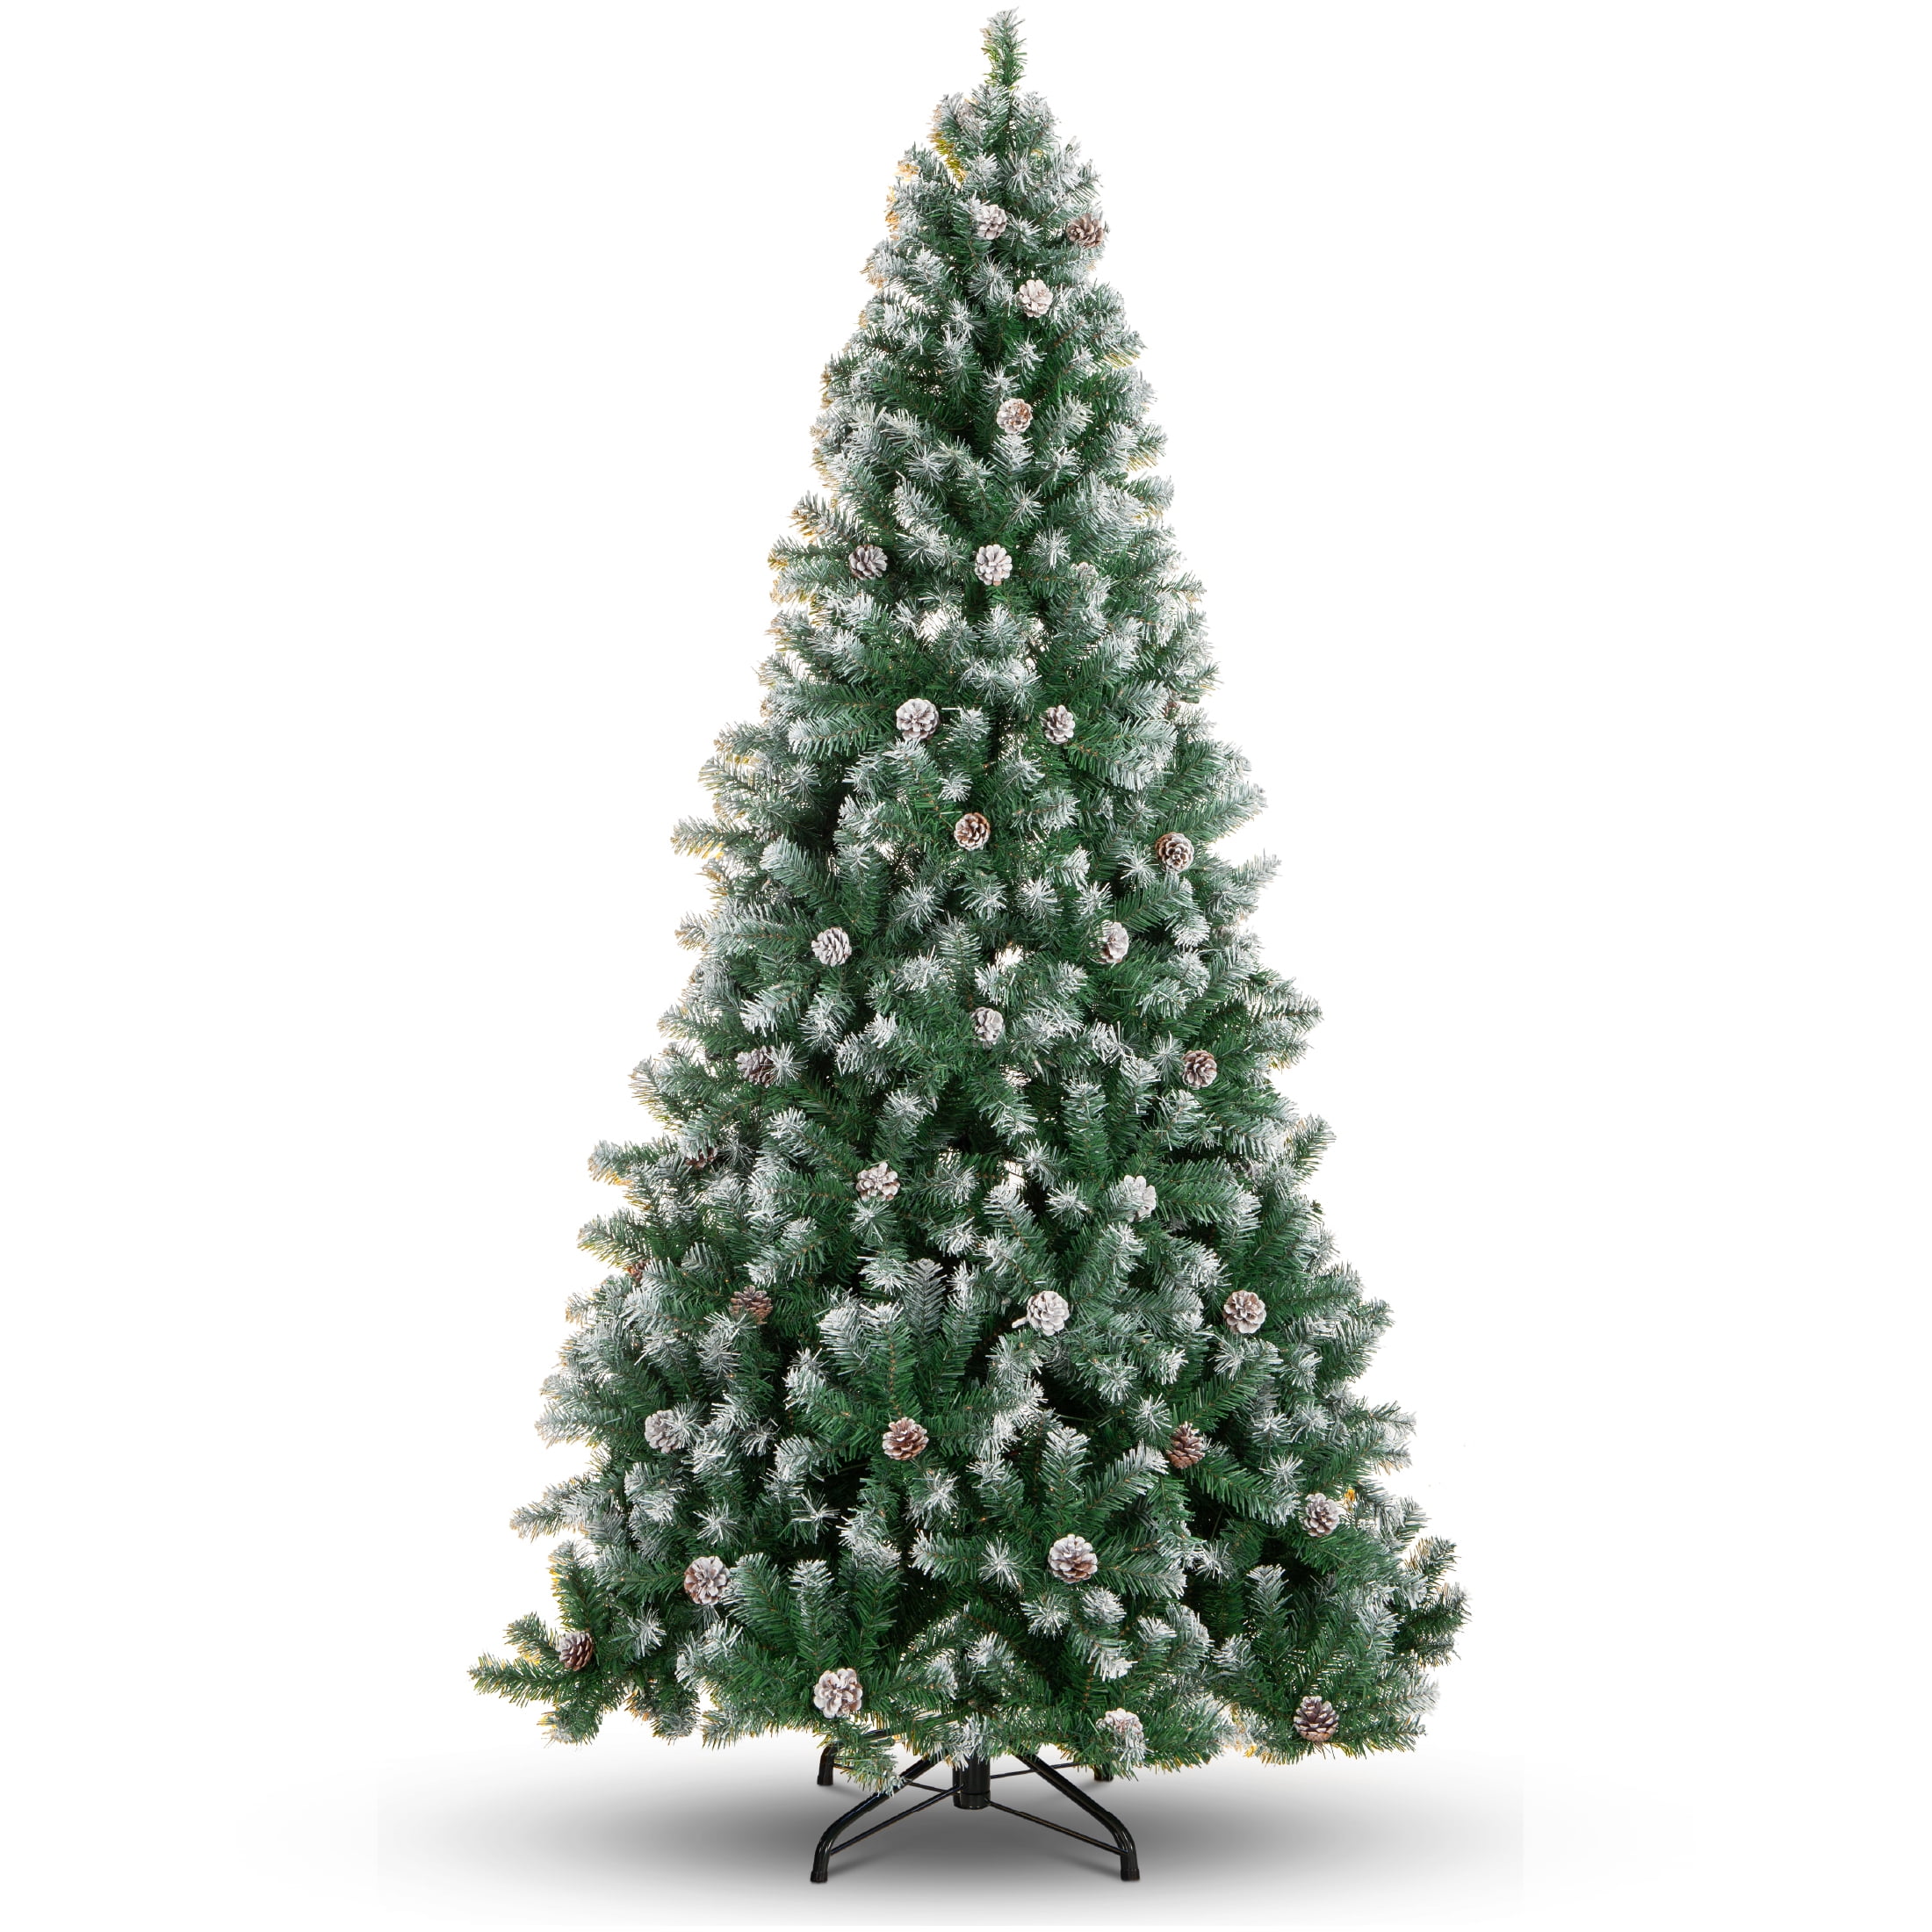 Flocked Green and White Pine Cone Themed Christmas Tree - Home with Holliday